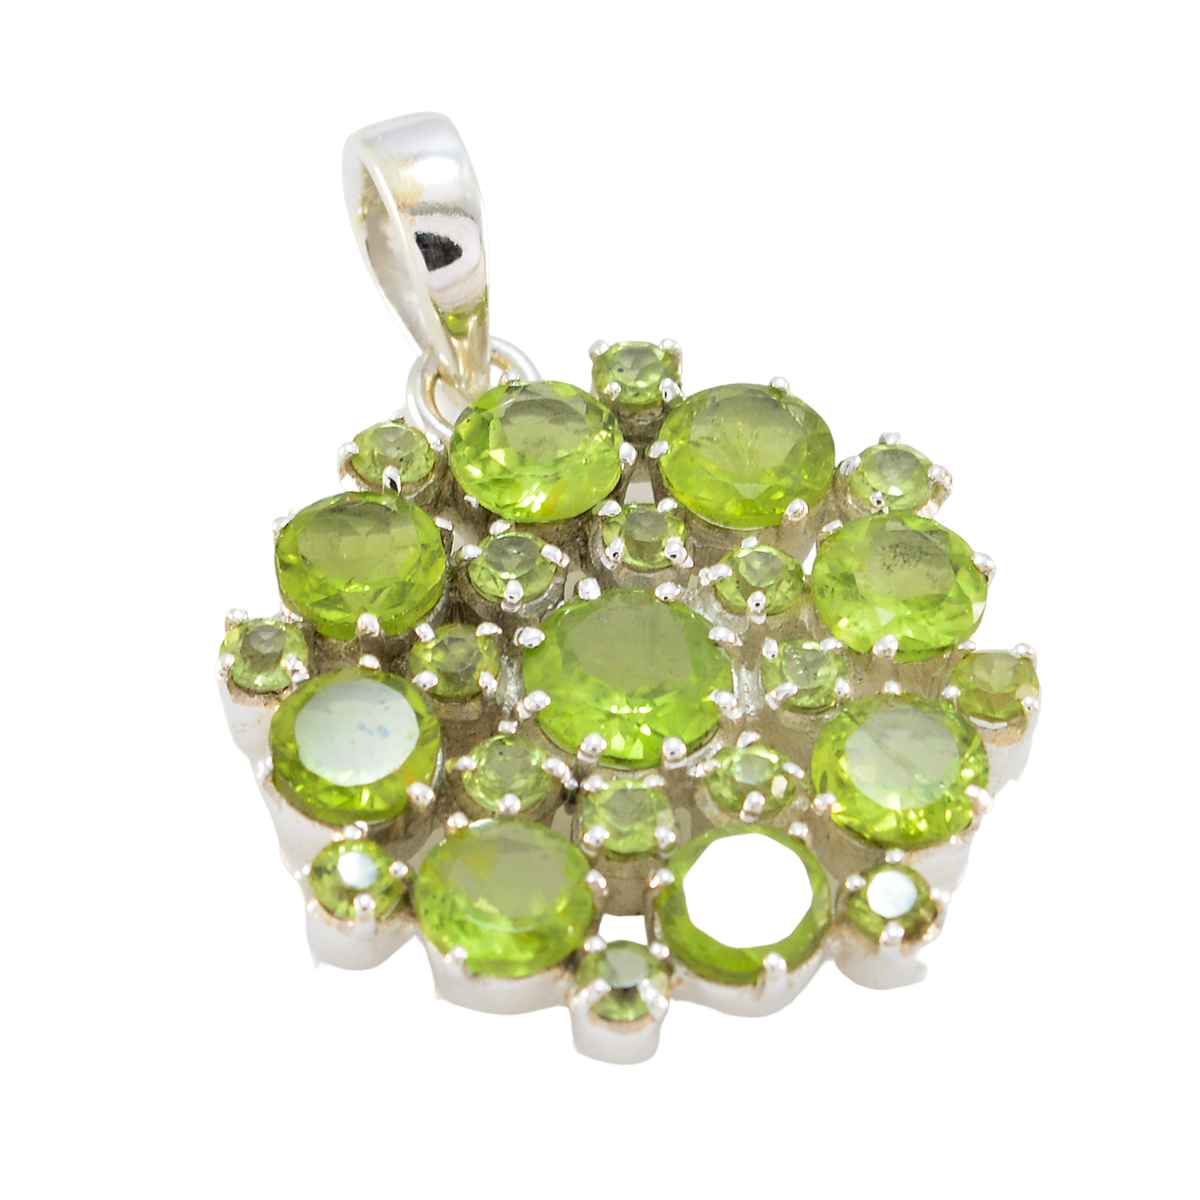 Riyo Comely Gemstone Multi Faceted Green Peridot 1077 Sterling Silver Pendant Gift For Birthday